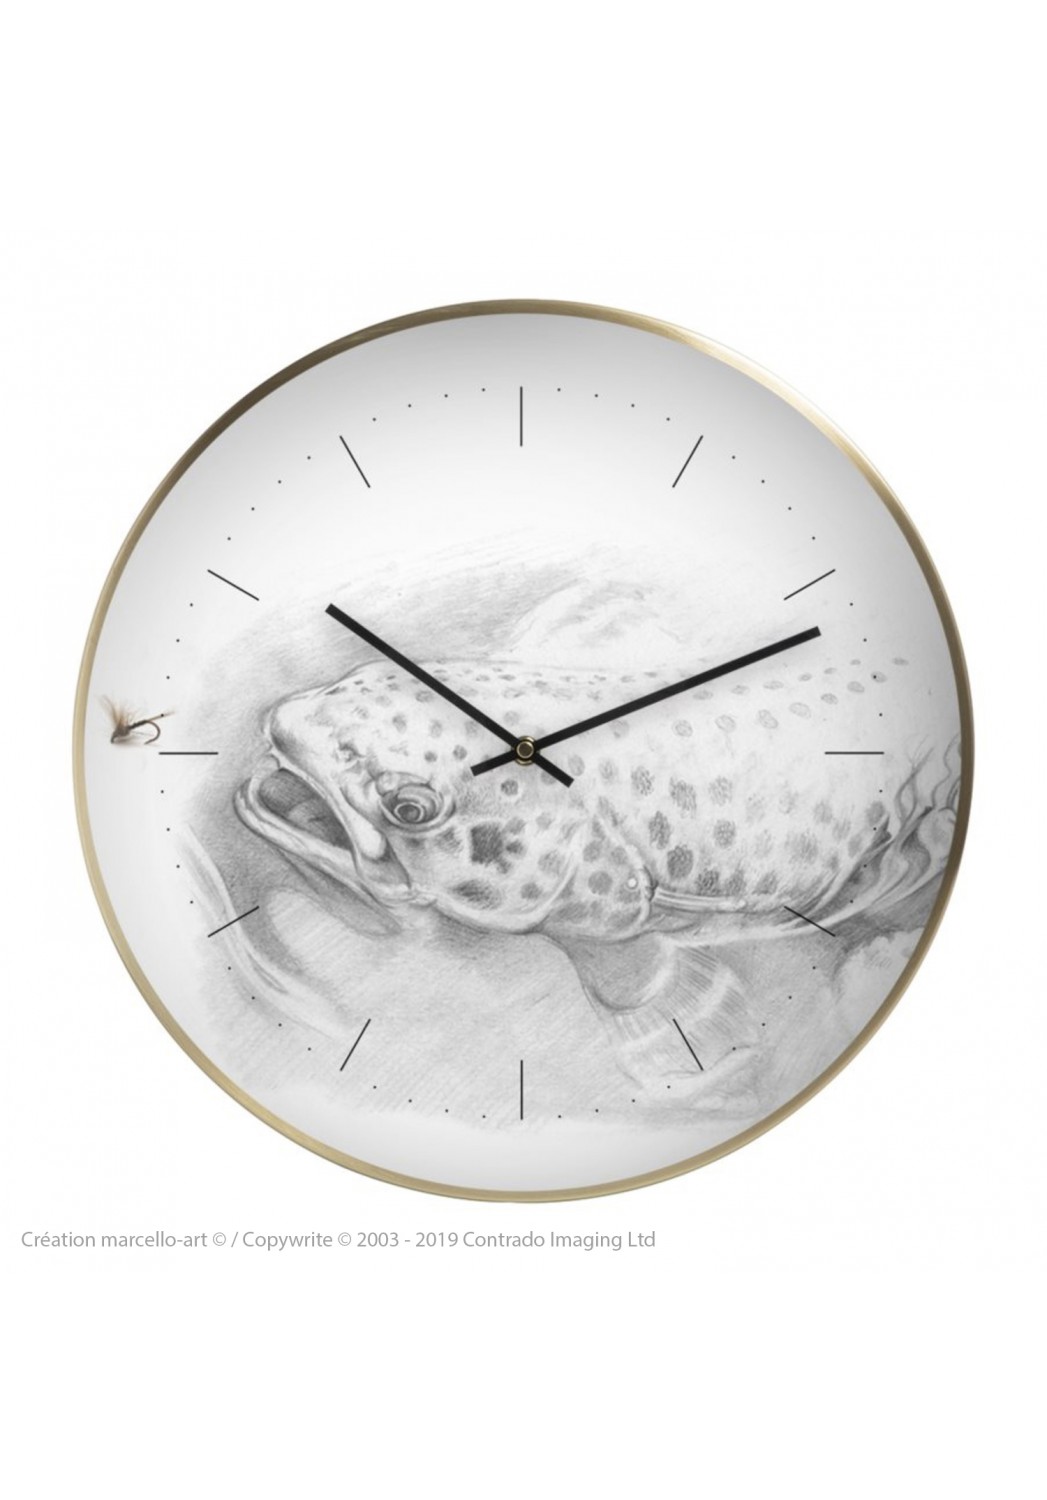 Marcello-art: Decoration accessoiries Wall clock 46 Trout of the Gaves